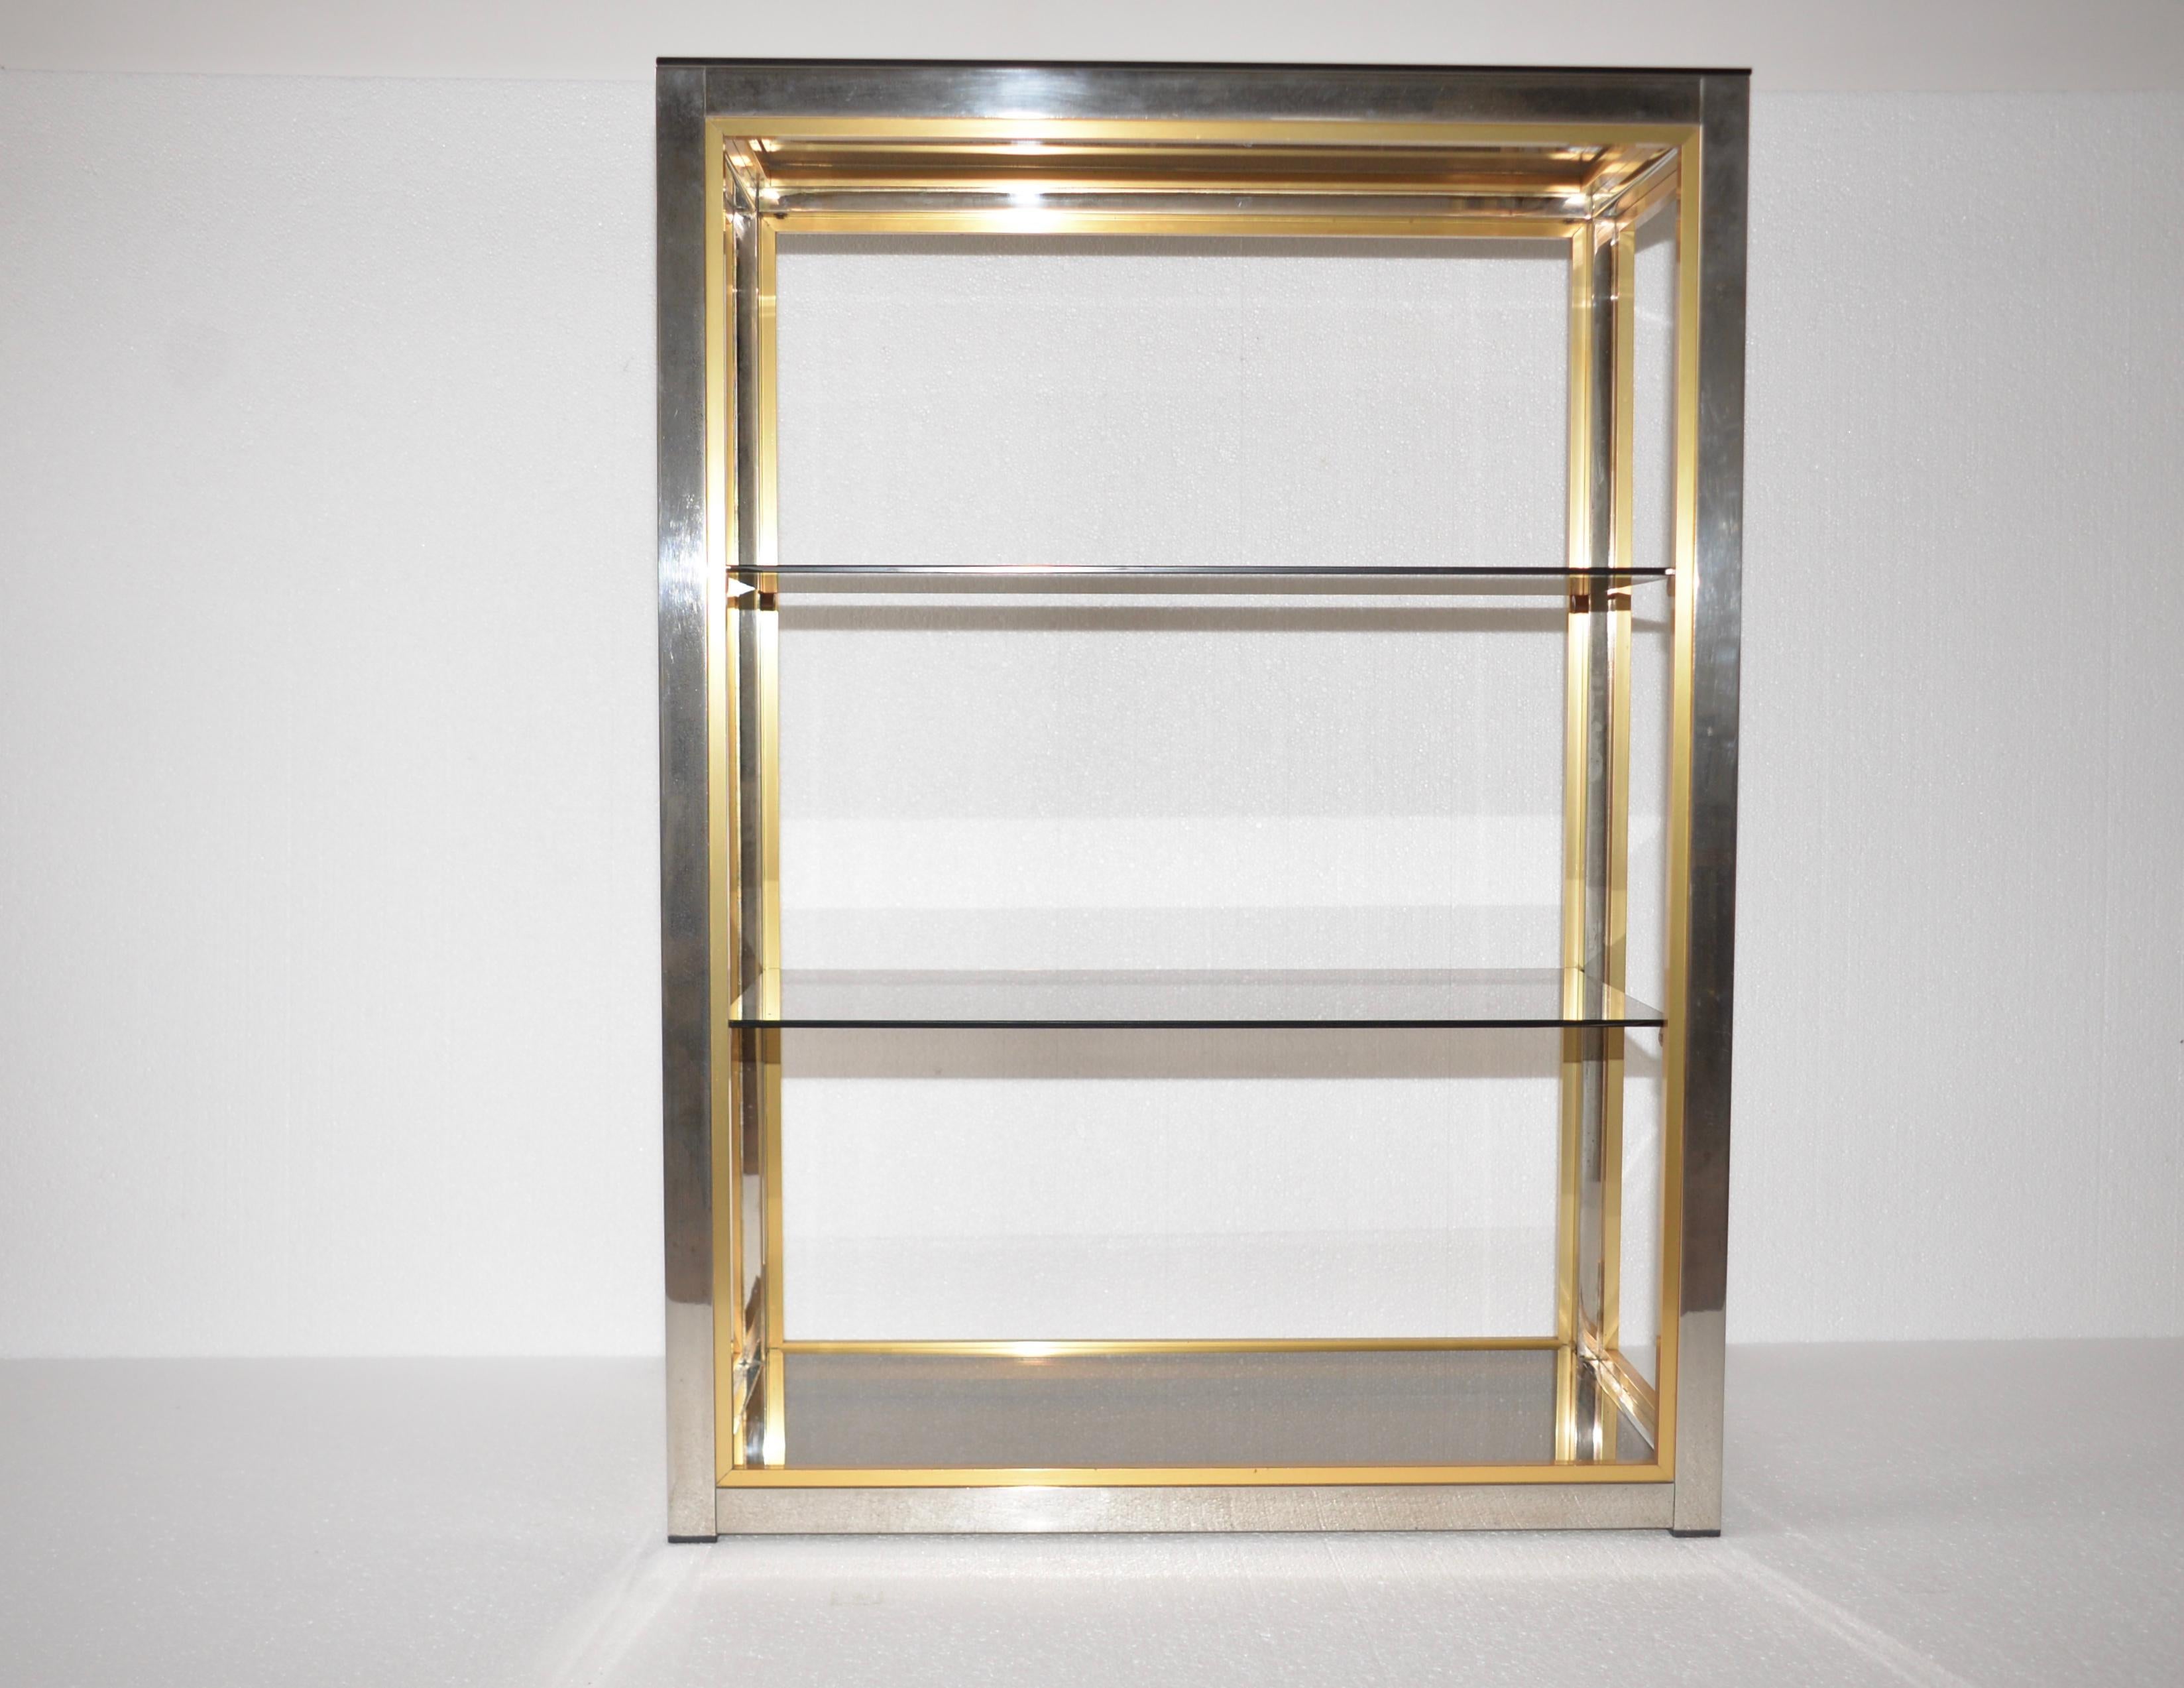 An original Italian chrome shelving unit designed by Renato Zevi for Romeo Rega. A lovely item with four shelves within a polished chrome frame and it is also edged in brass in the Hollywood Regency Style. An iconic piece well know and documented in